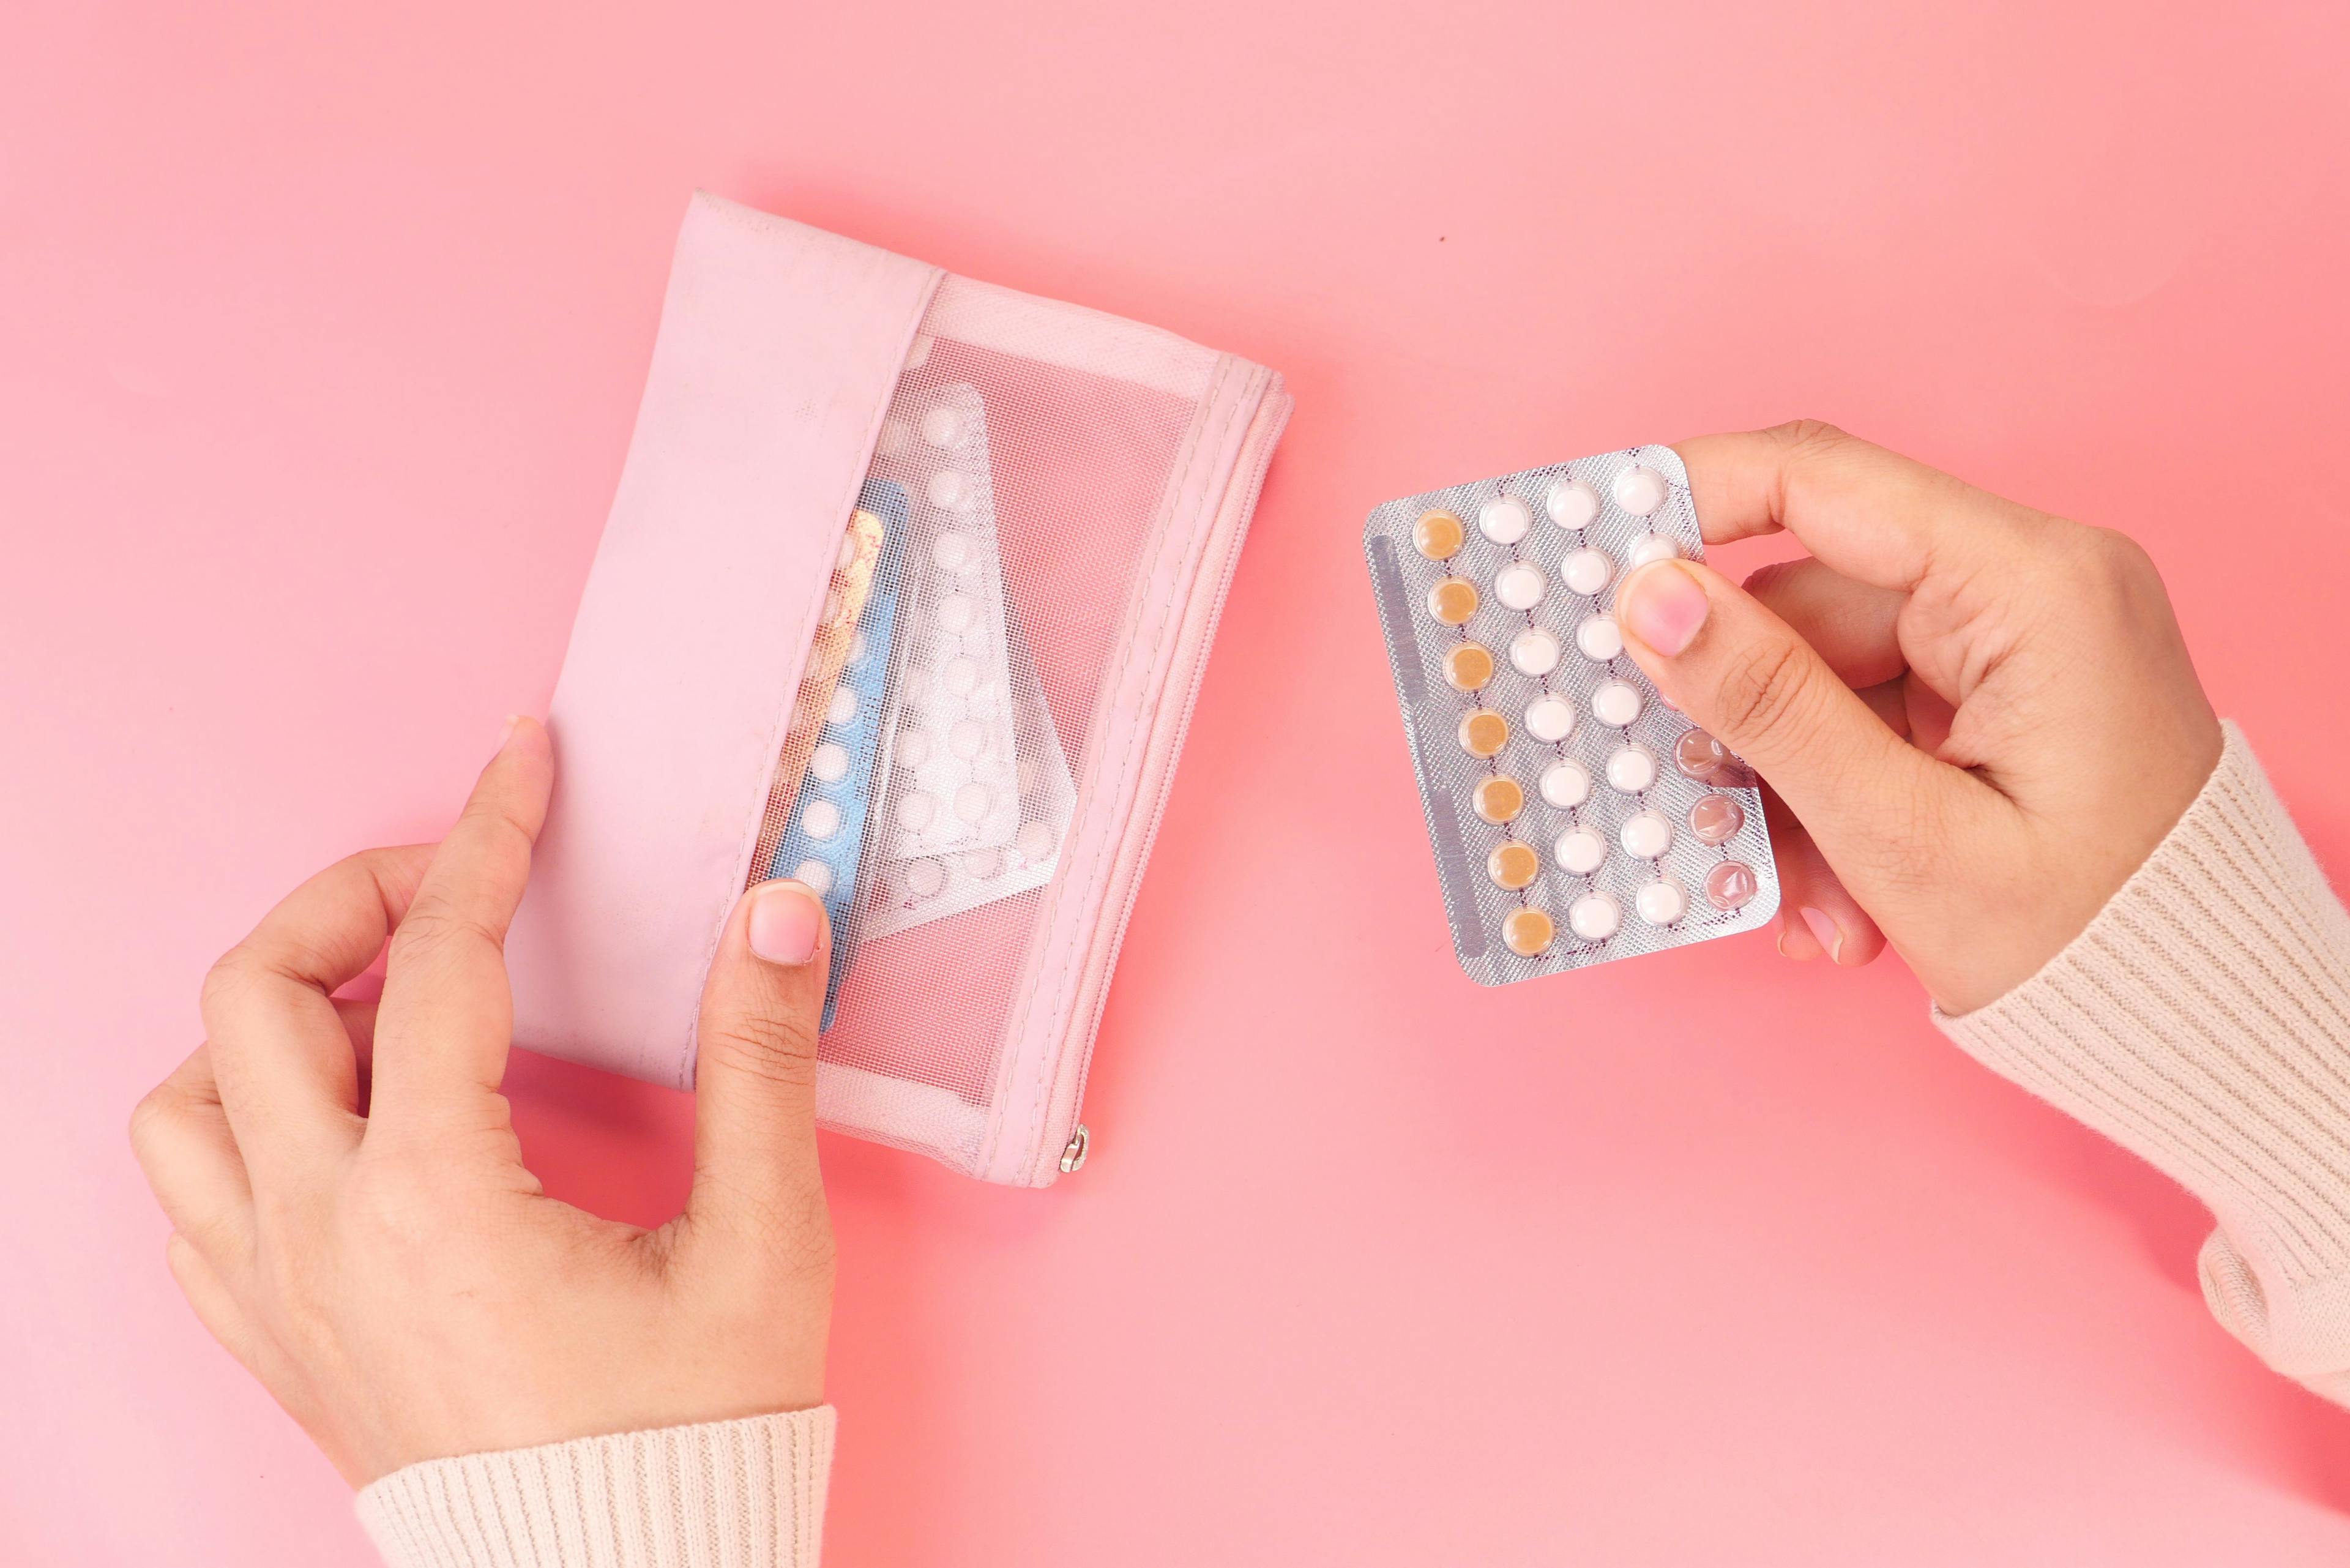 Updates on emergency contraception